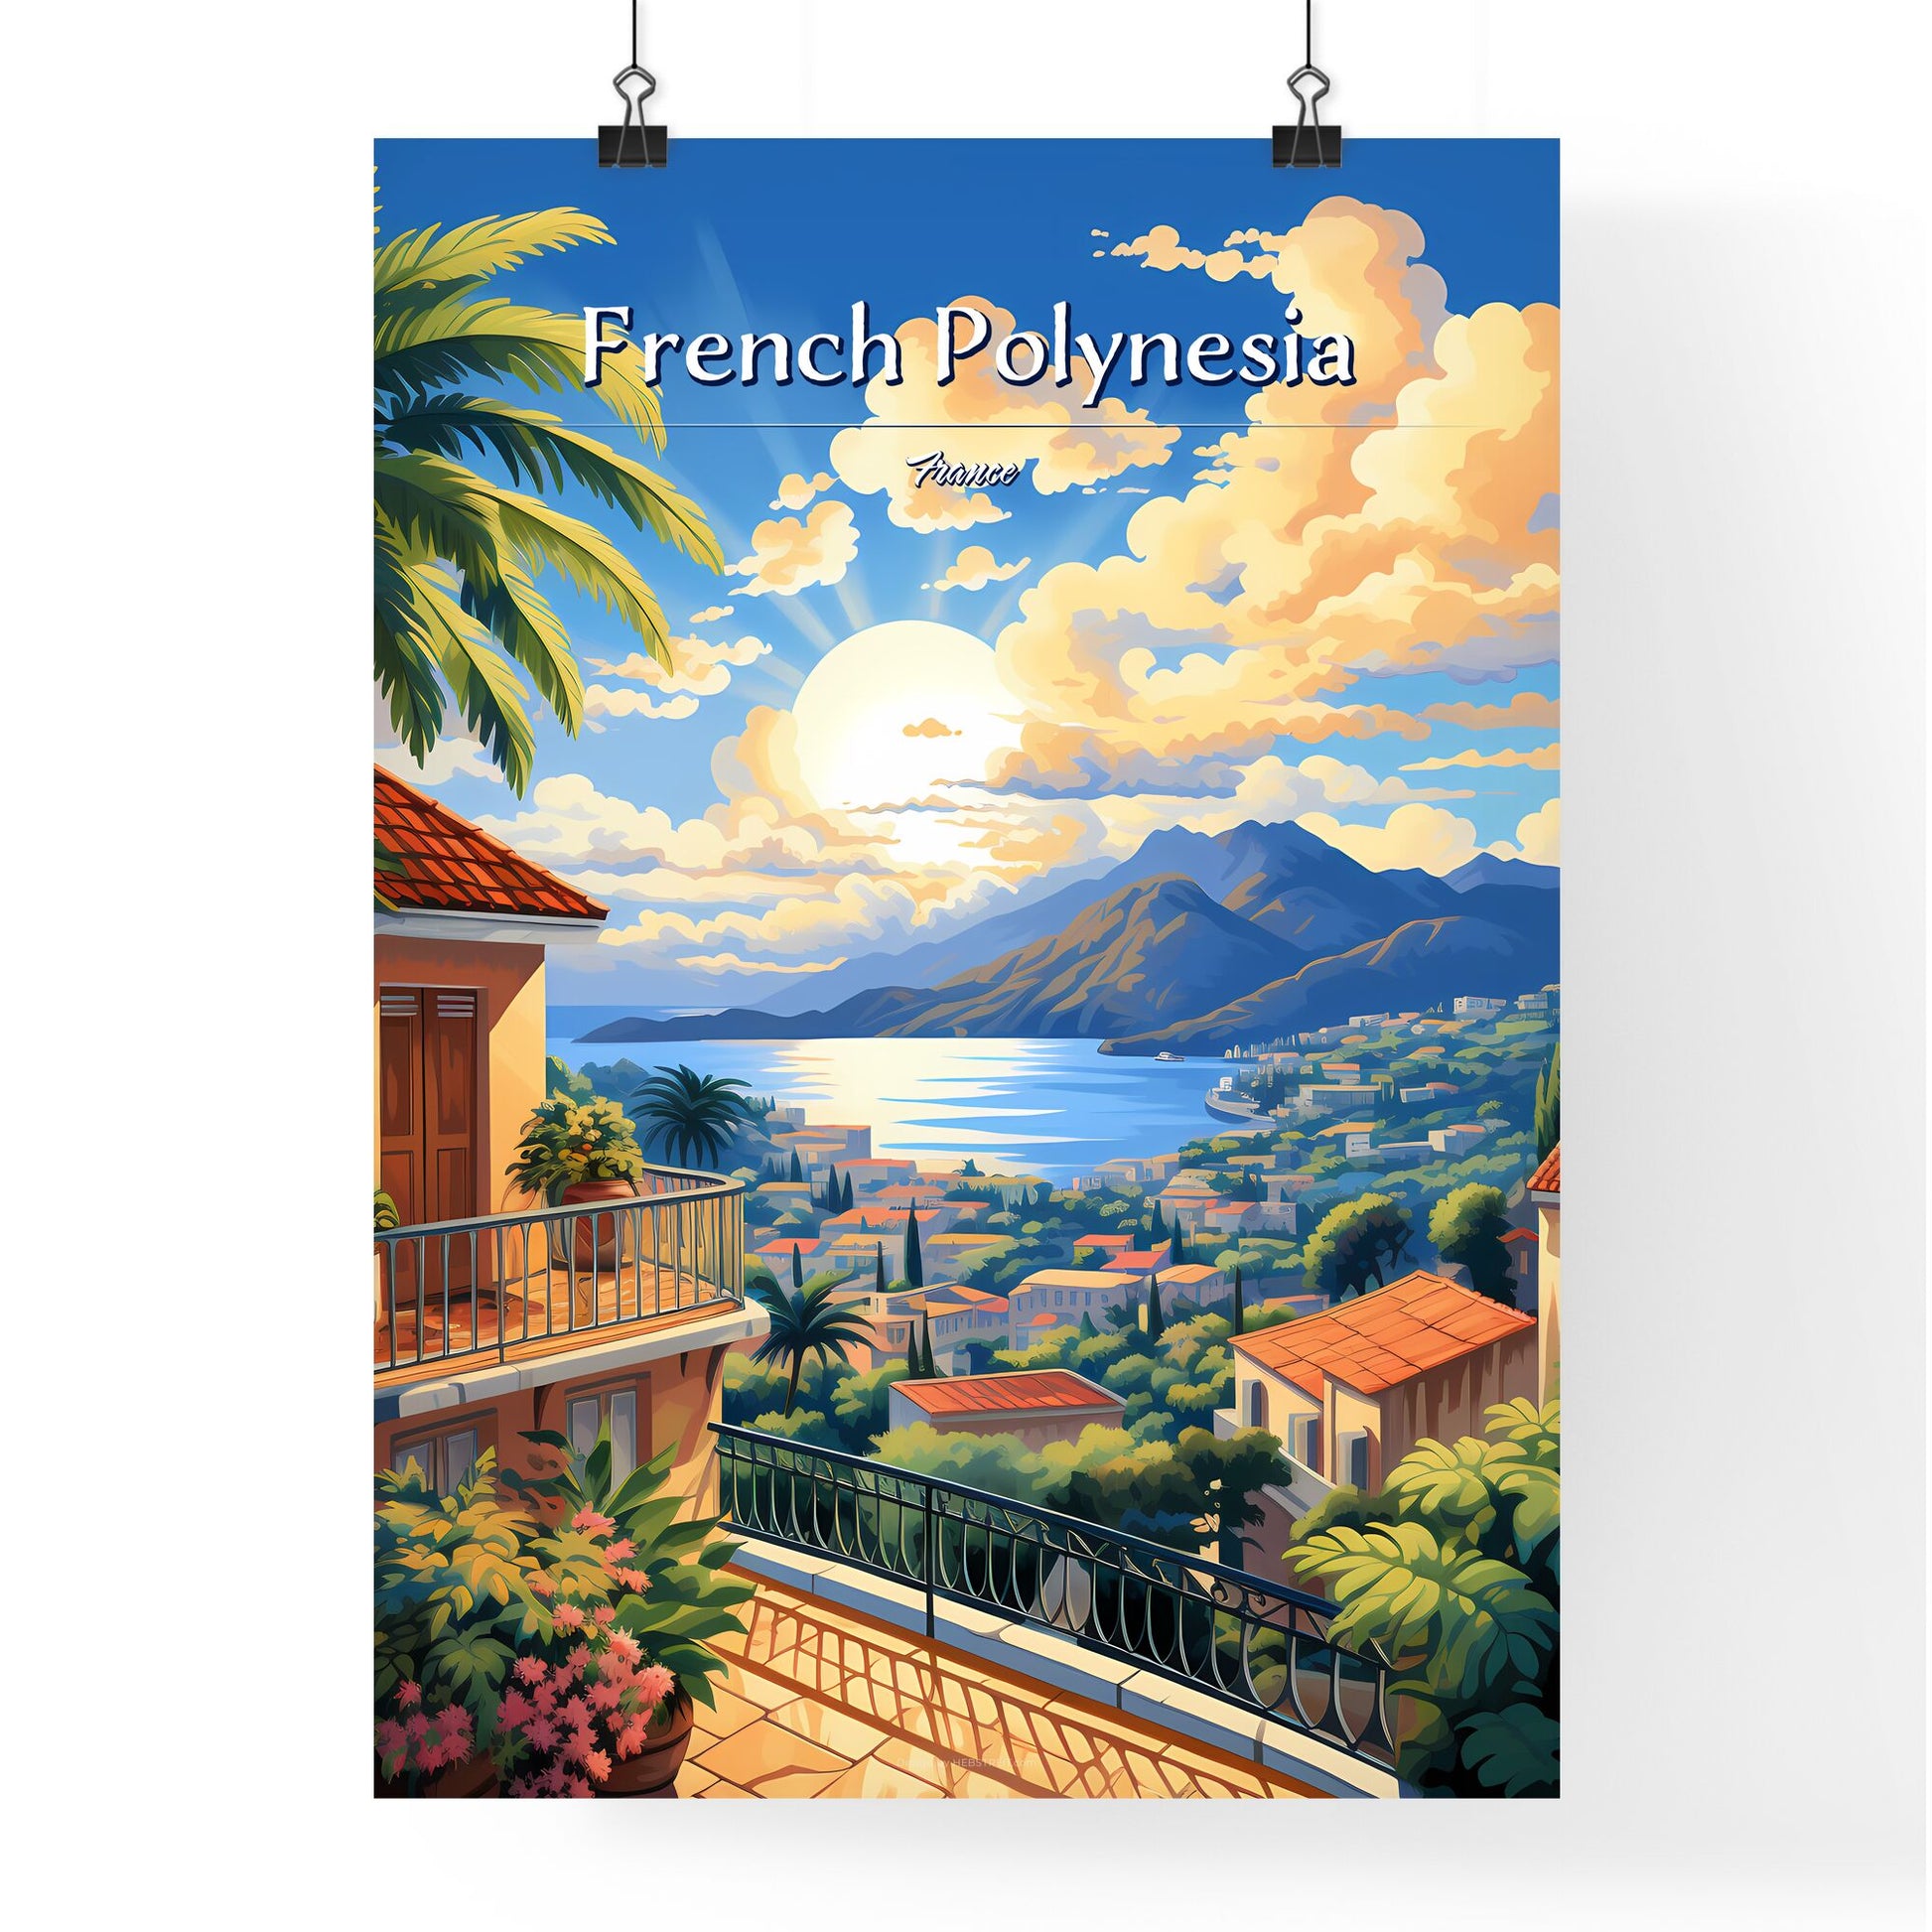 On the roofs of French Polynesia, France - Art print of a man holding a gun in front of a door Default Title